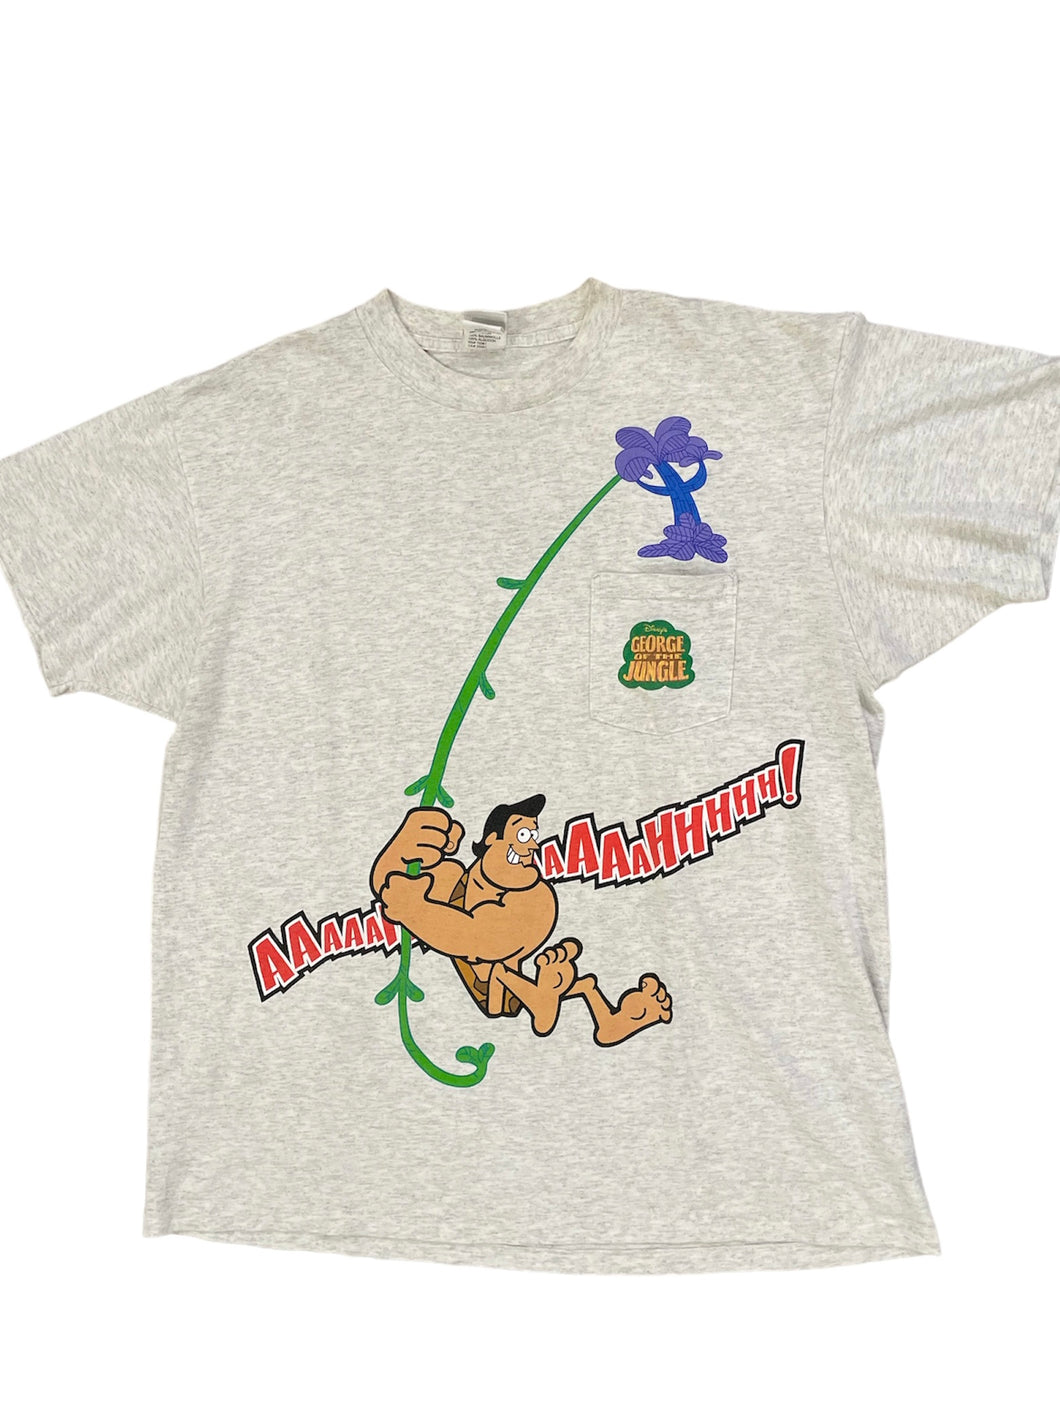 90’s George of the Jungle Tee